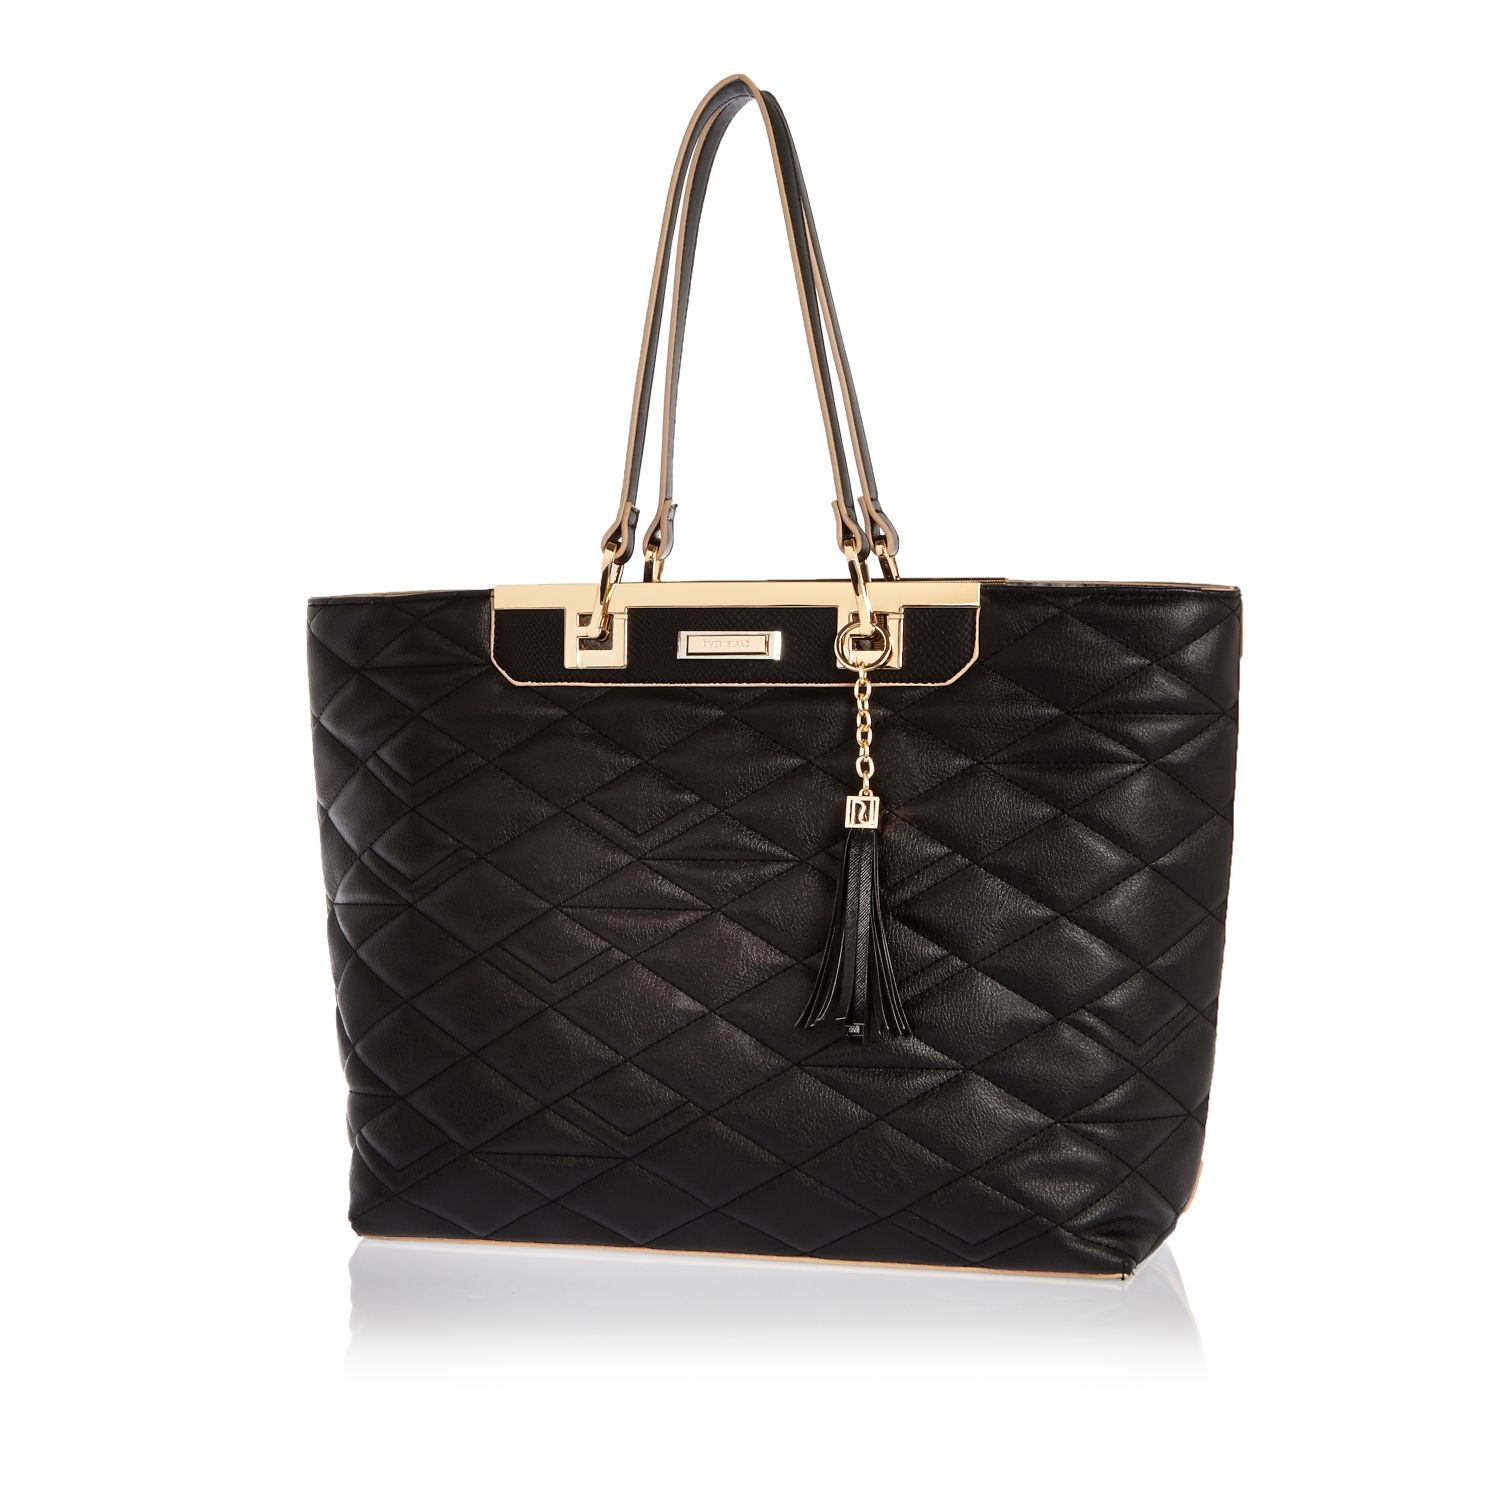 River Island Black Quilted Tote Handbag - Lyst